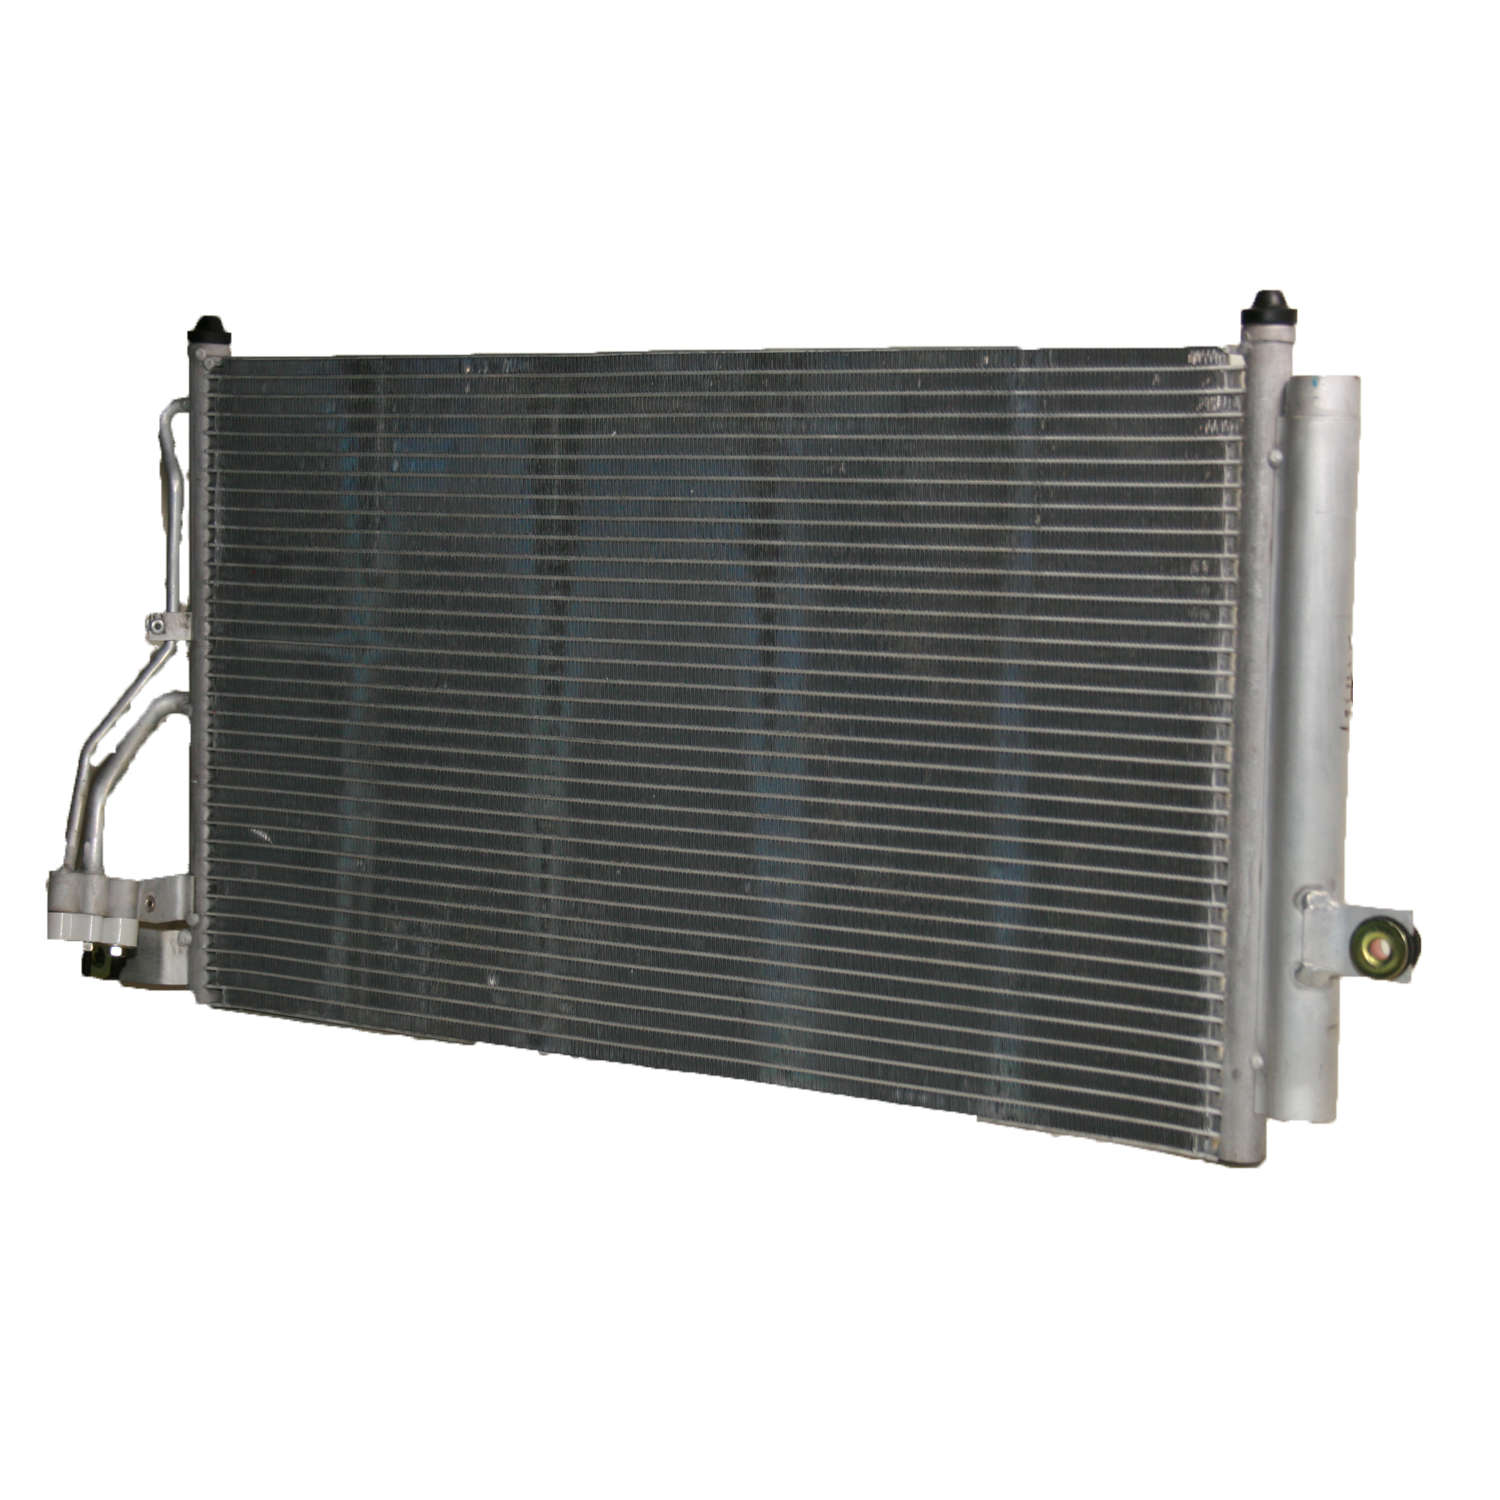 TCW Condenser 44-3590 New Product Image field_60b6a13a6e67c